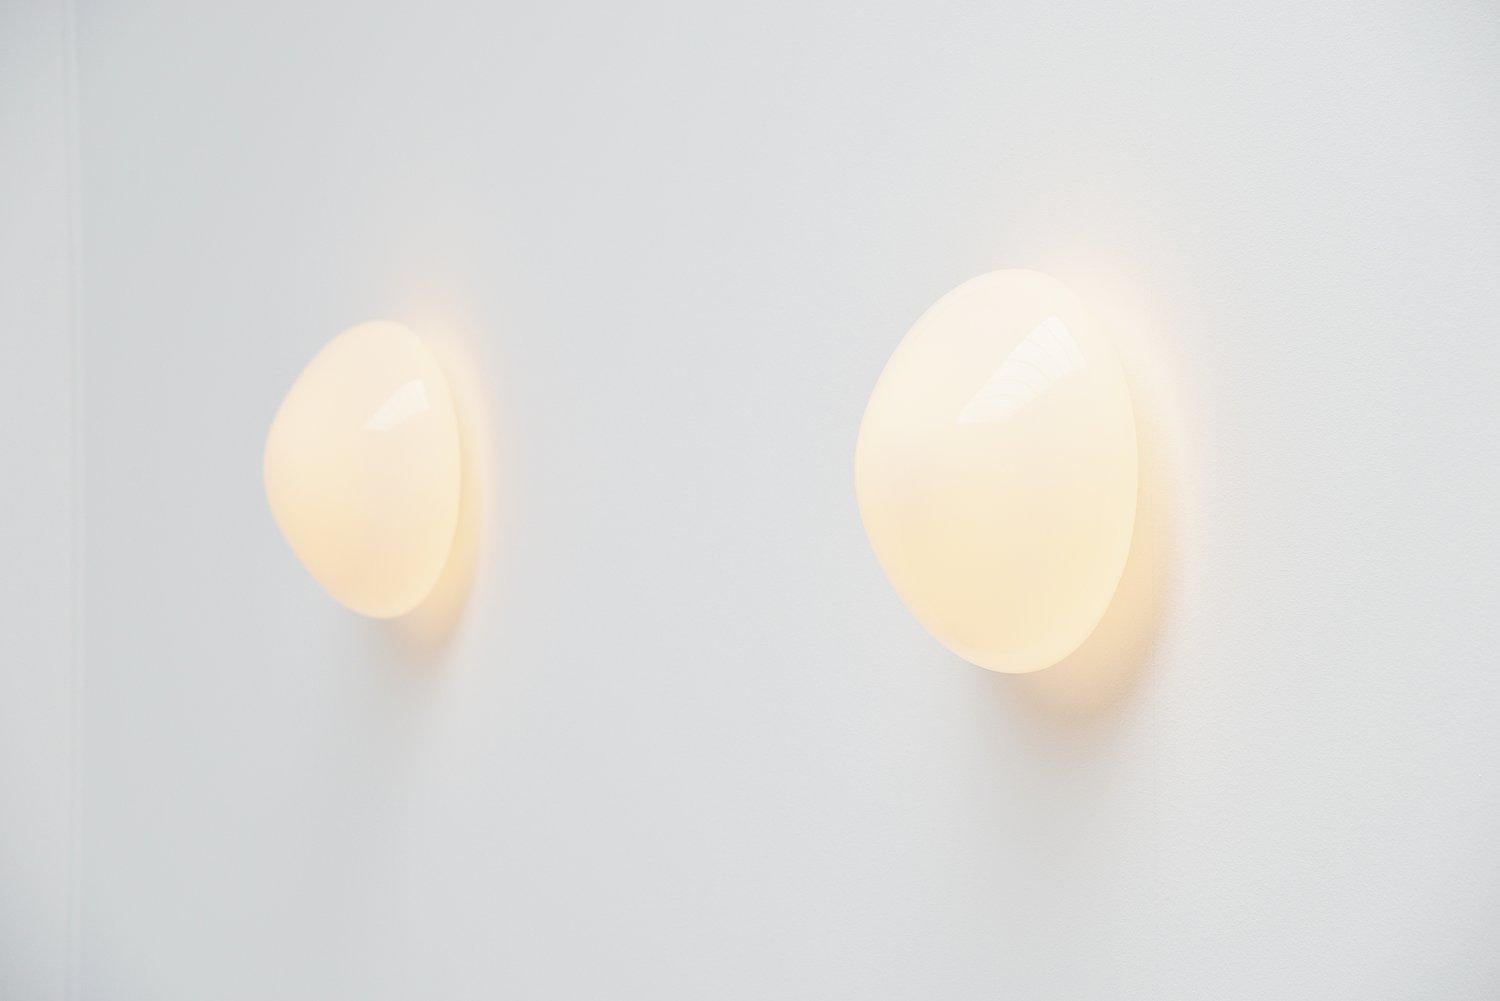 Very nice wall or ceiling lamps designed by Wilhelm Wagenfeld for Lindner, Germany 1955. These lamps have a very nice organic mushroom shape. The ceiling plate is made of solid porcelain and the shade is made of white glass. The lamps give very nice